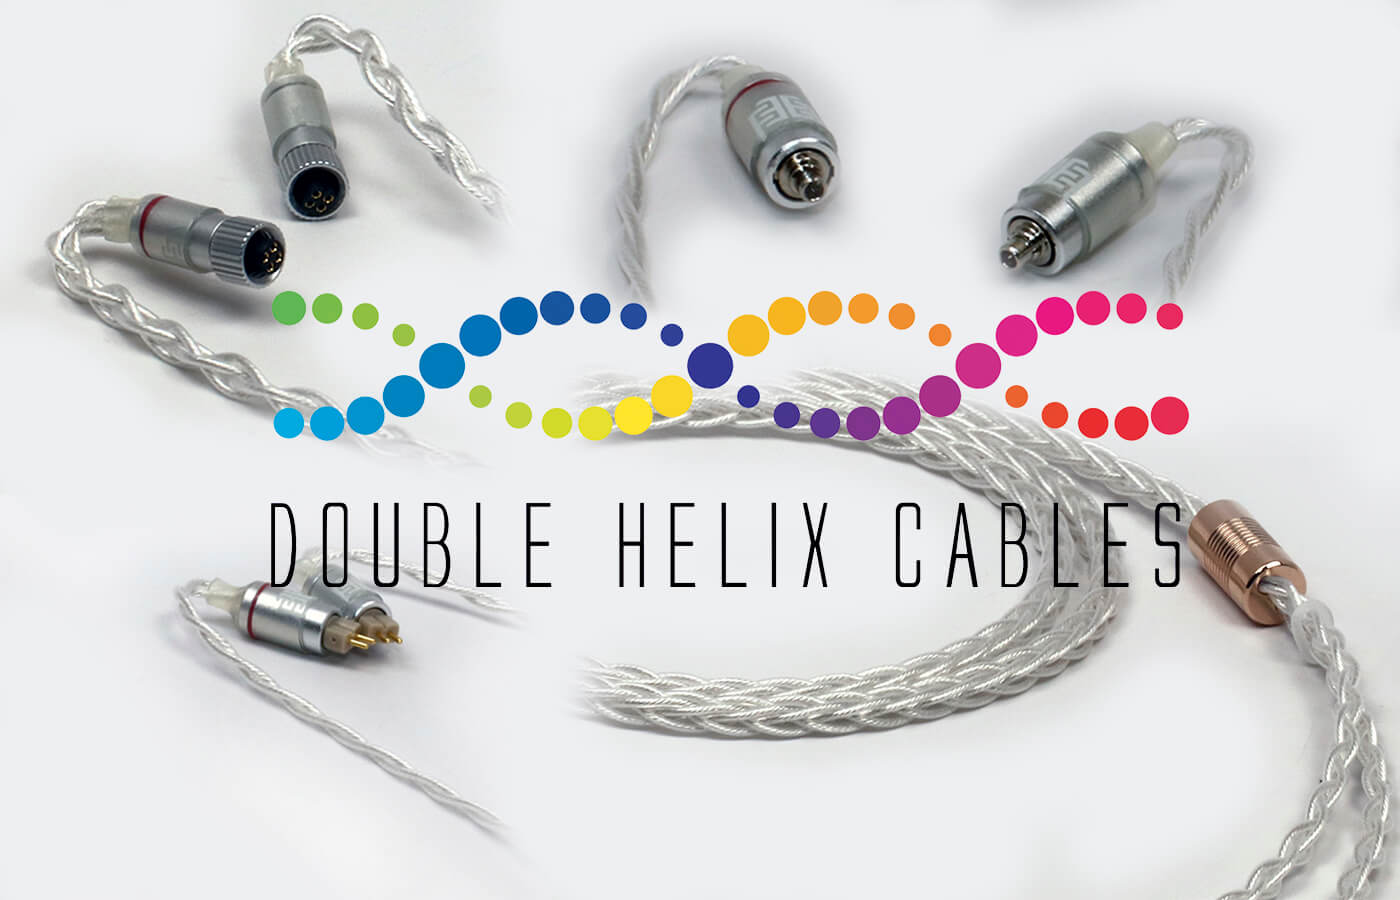 double-helix-cables-dhc-occ-litz-headphone-cable-eidolic-iem-2pin-MMCX